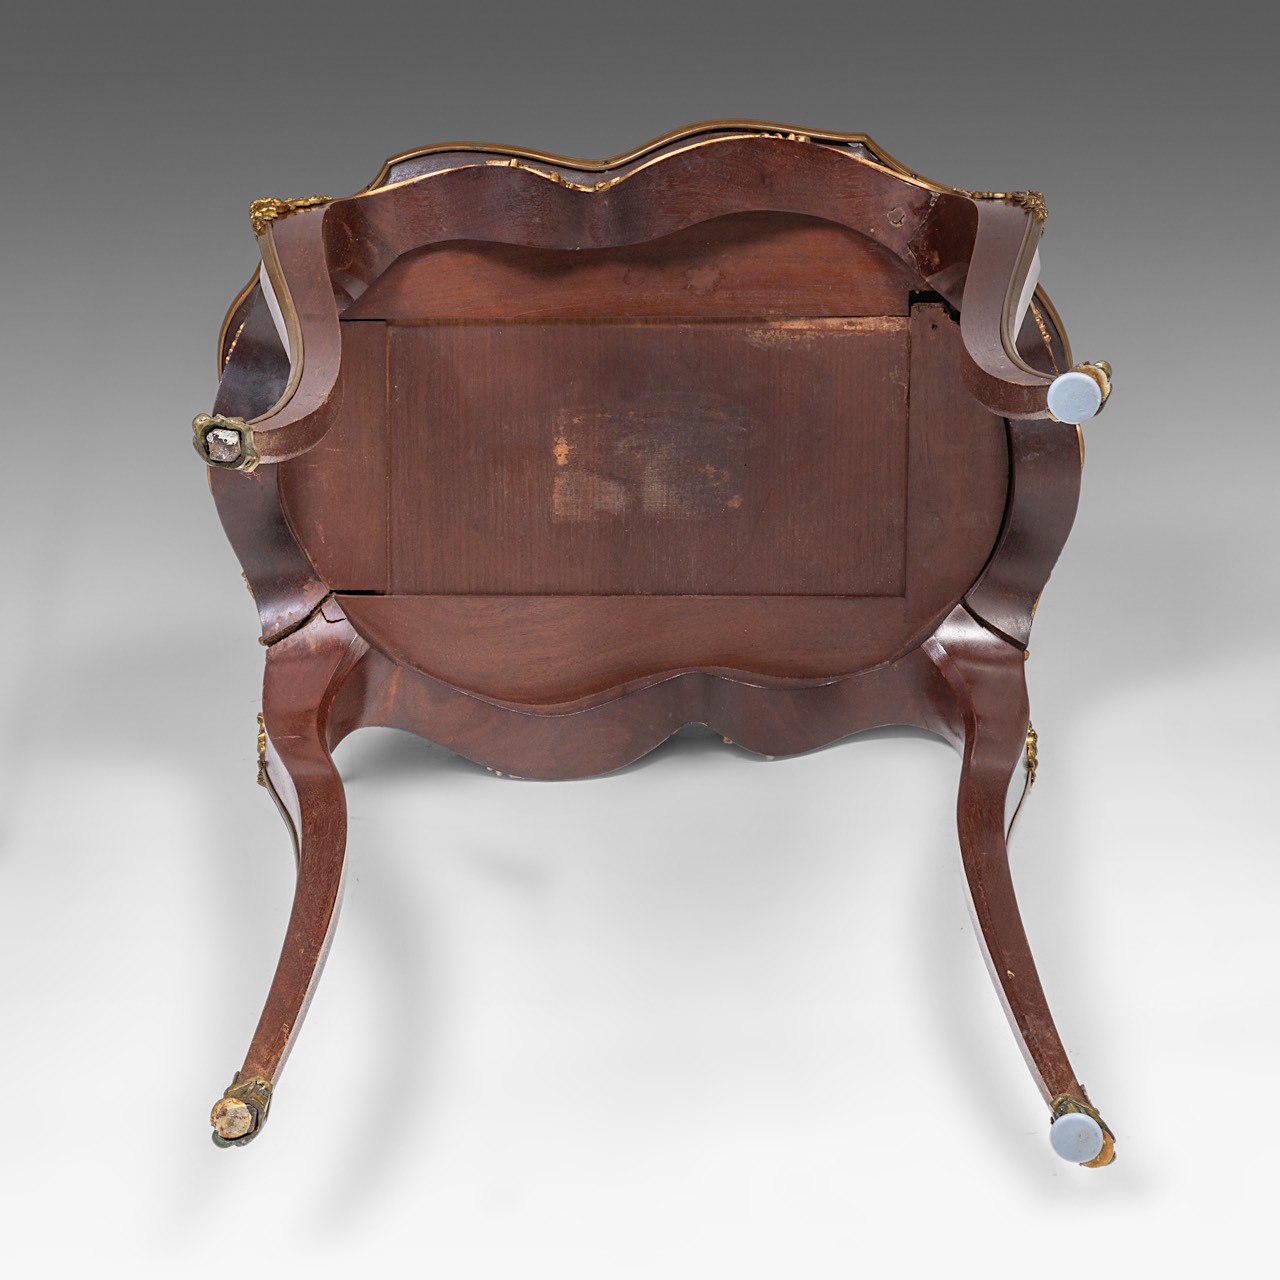 A mahogany marble-topped Louis XV (1723-1774) occasional table with gilt bronze mounts, H 77,5 cm - - Image 7 of 9